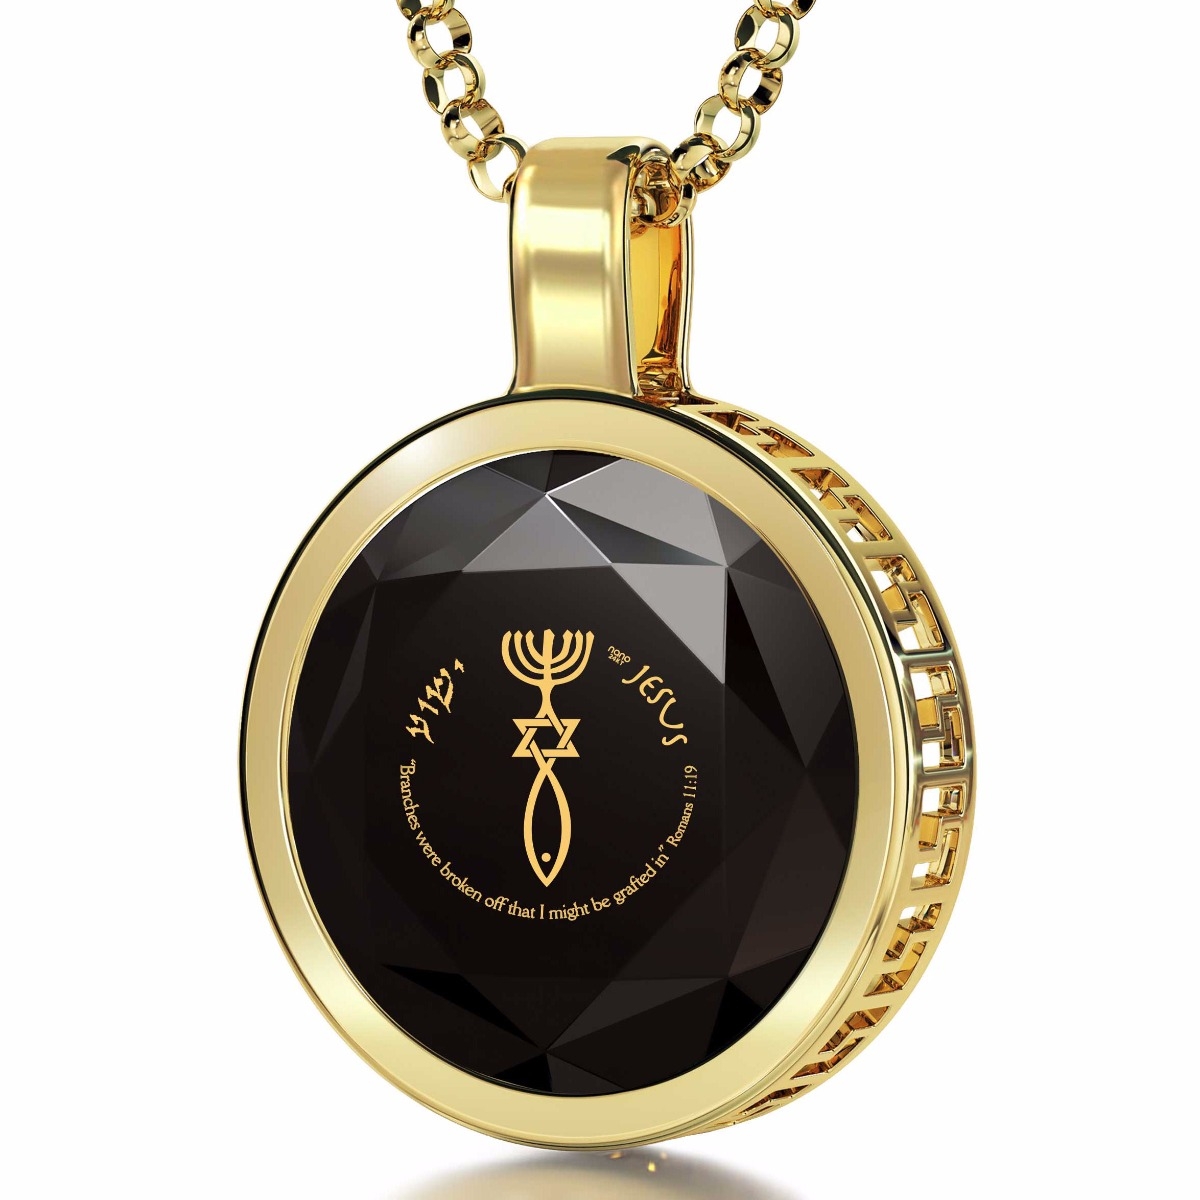 Nano 24K Gold Plated and Gemstone Grafted-In Necklace with 24K Gold Micro-Inscription (Black) - 1